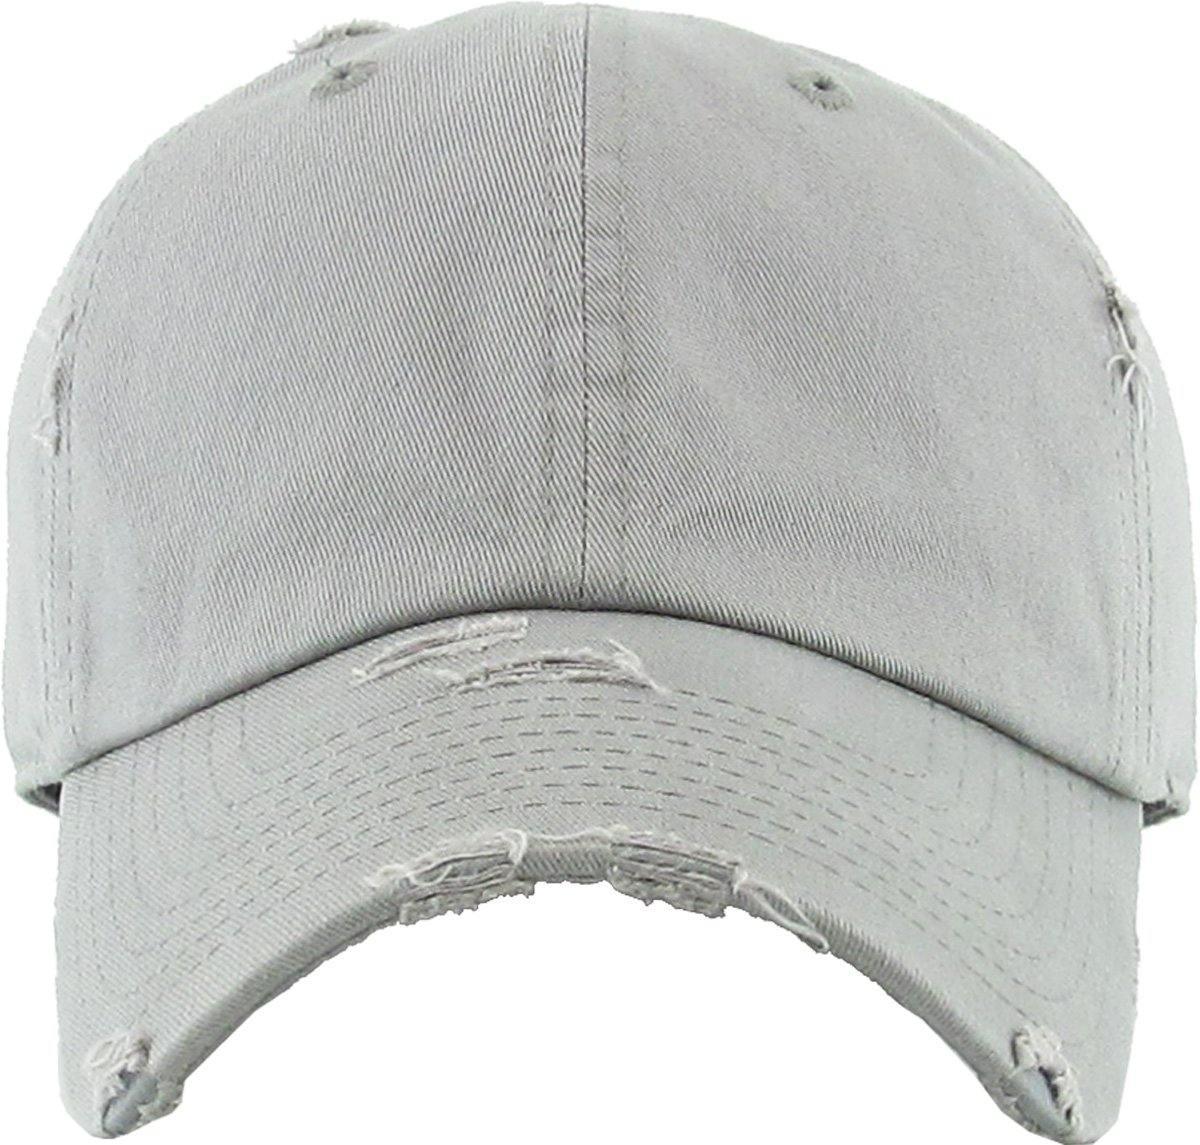 Blank Distressed Dad Hats - Constantly Create Shop